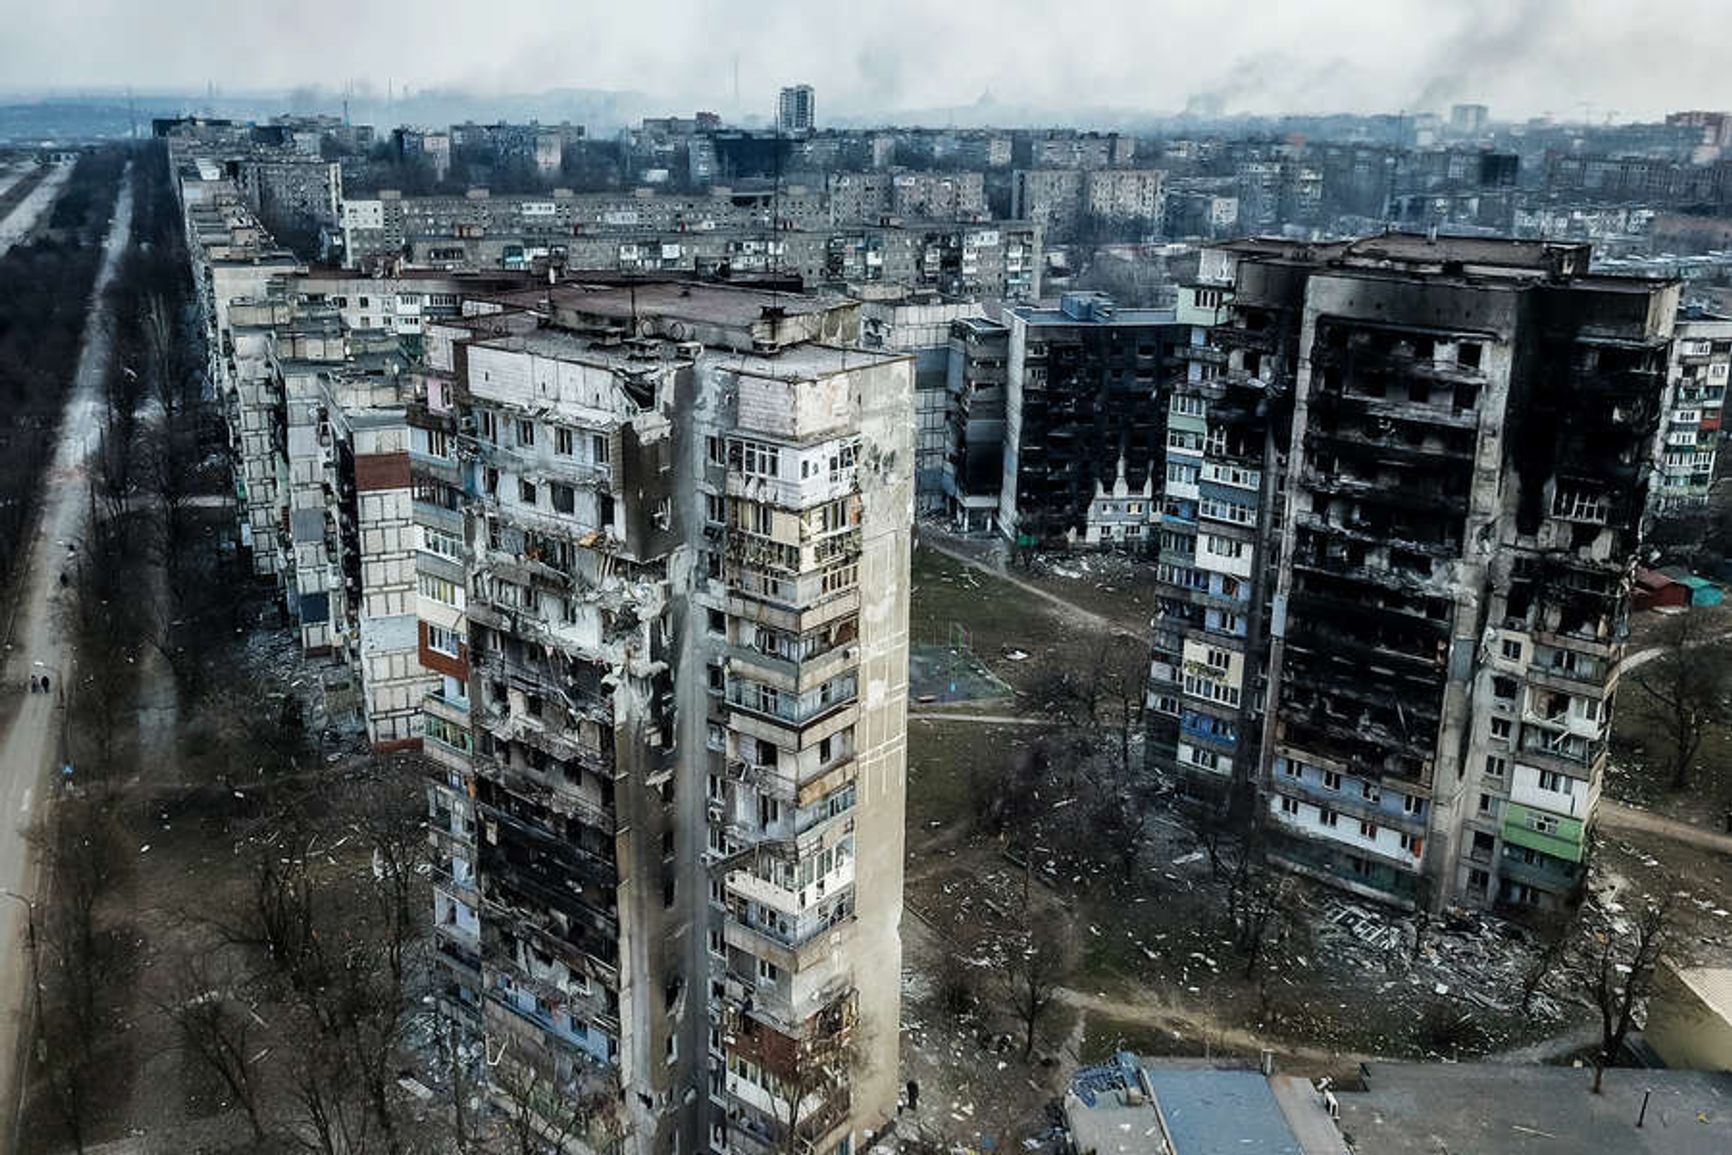 Mariupol after the Russian invasion